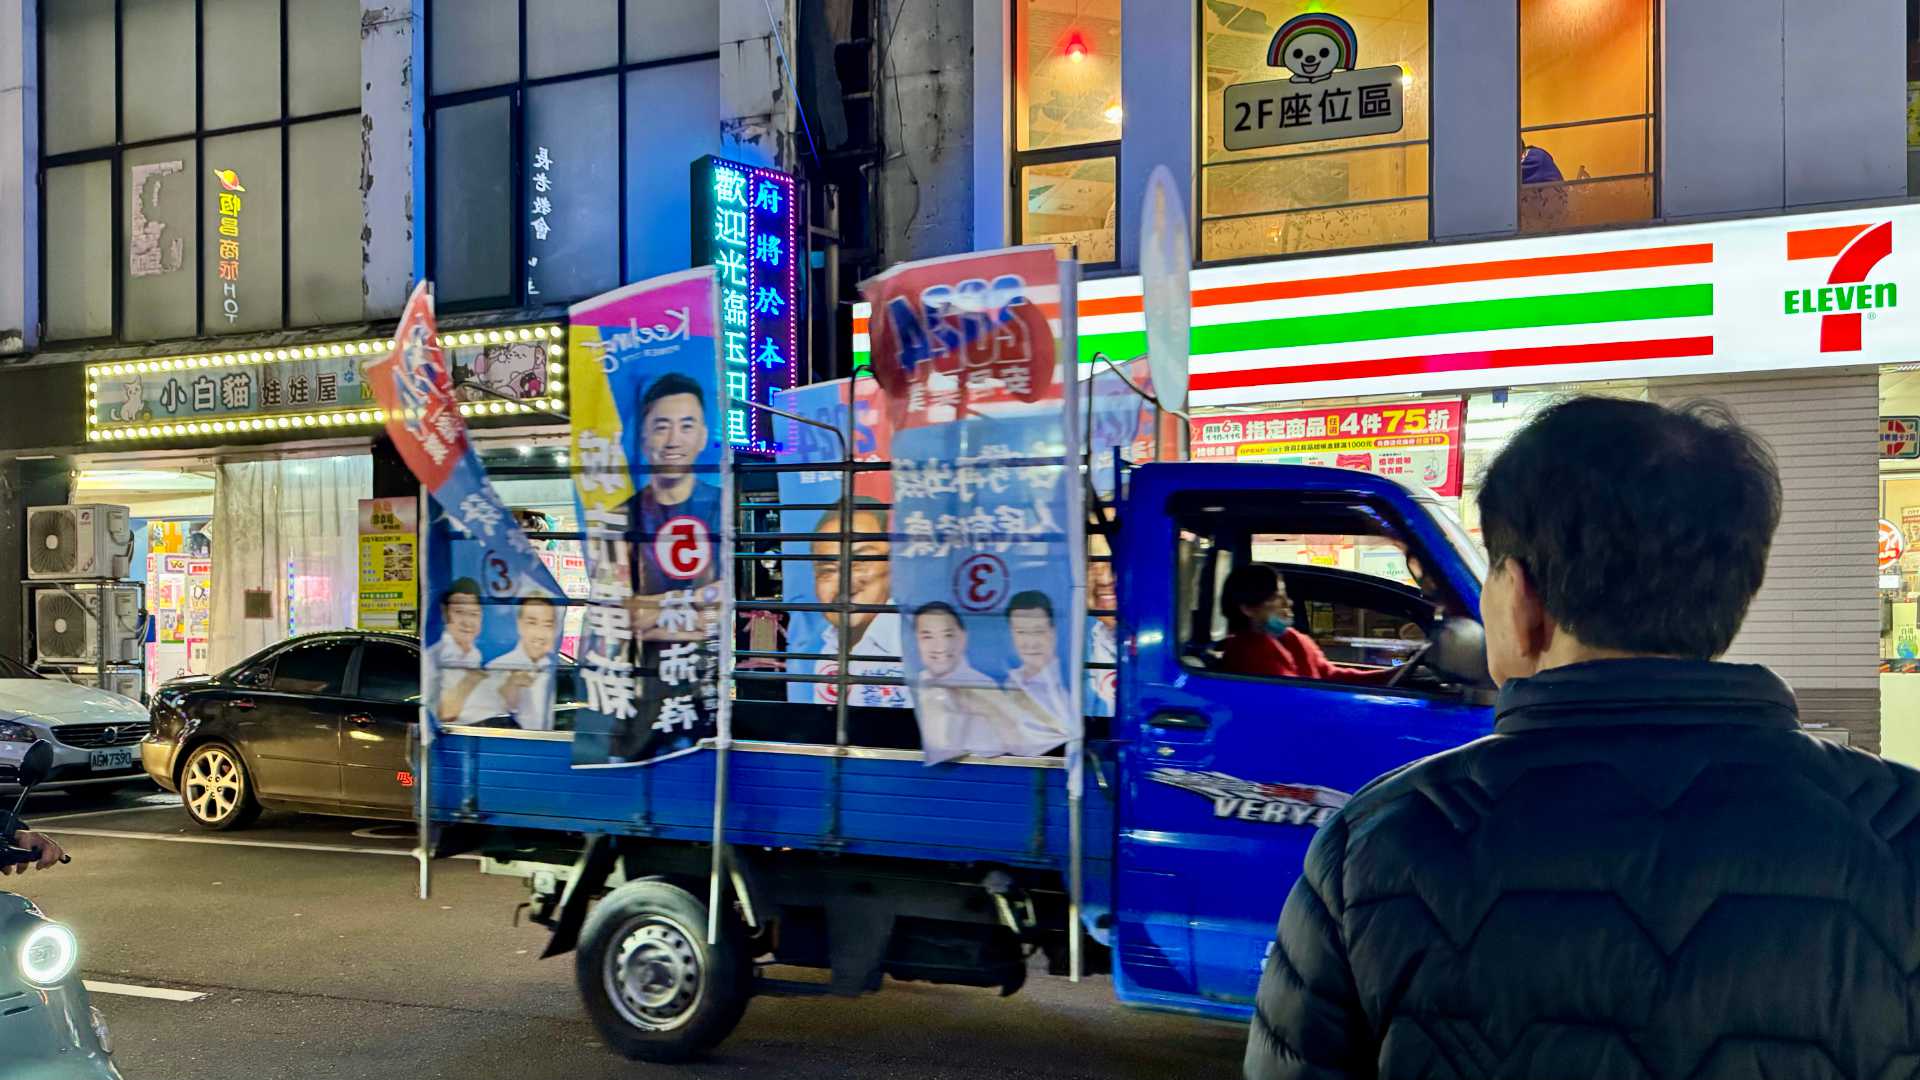 A small truck driving past pedestrians, with political flags and banners on the back.